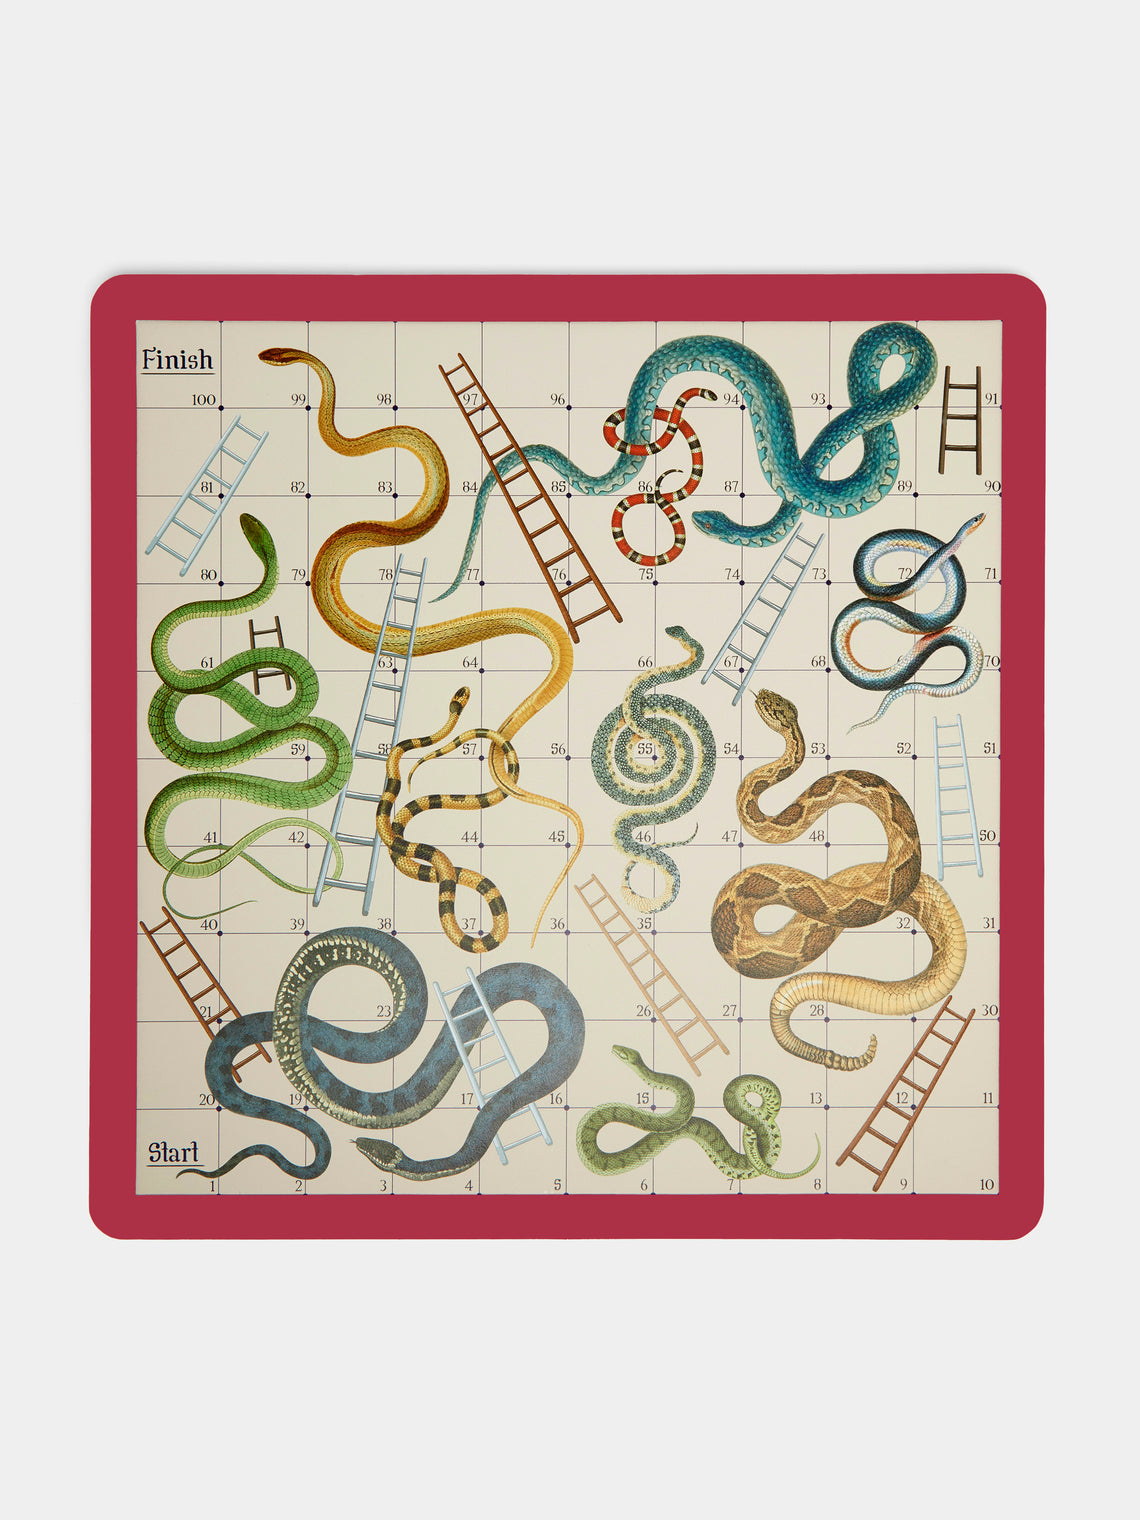 William & Son - Leather Snakes & Ladders and Ludo Games Compendium - Red - ABASK - 